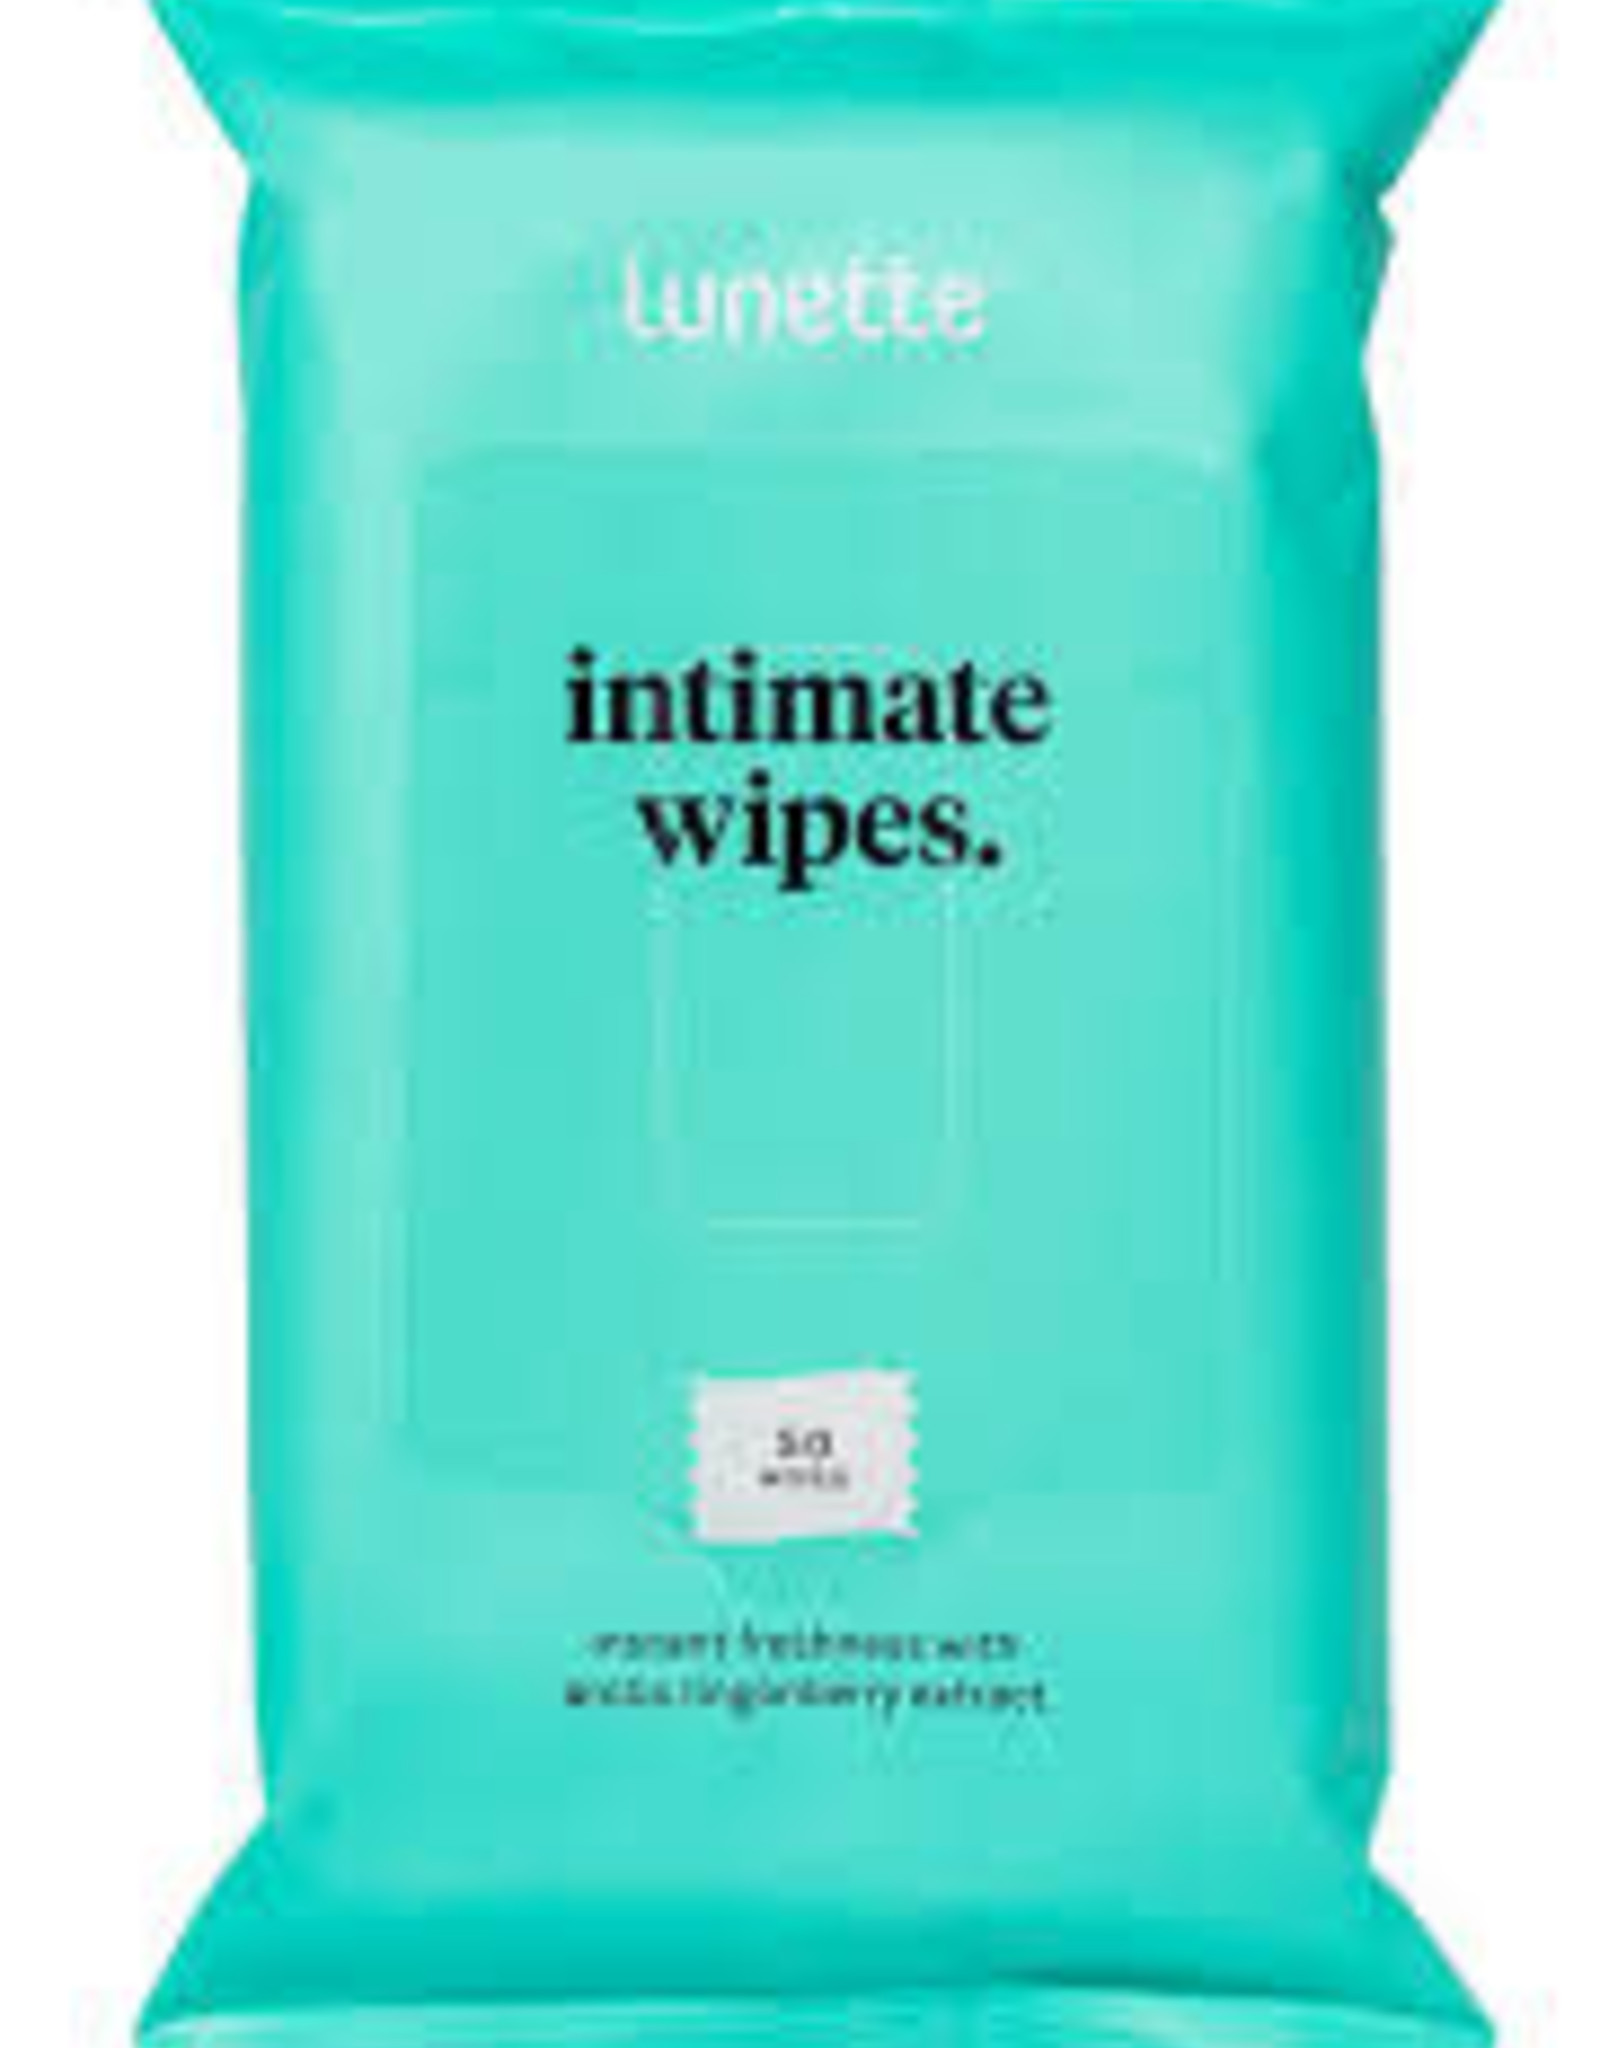 Lunette Lunette Intimate Wipes - 50 count